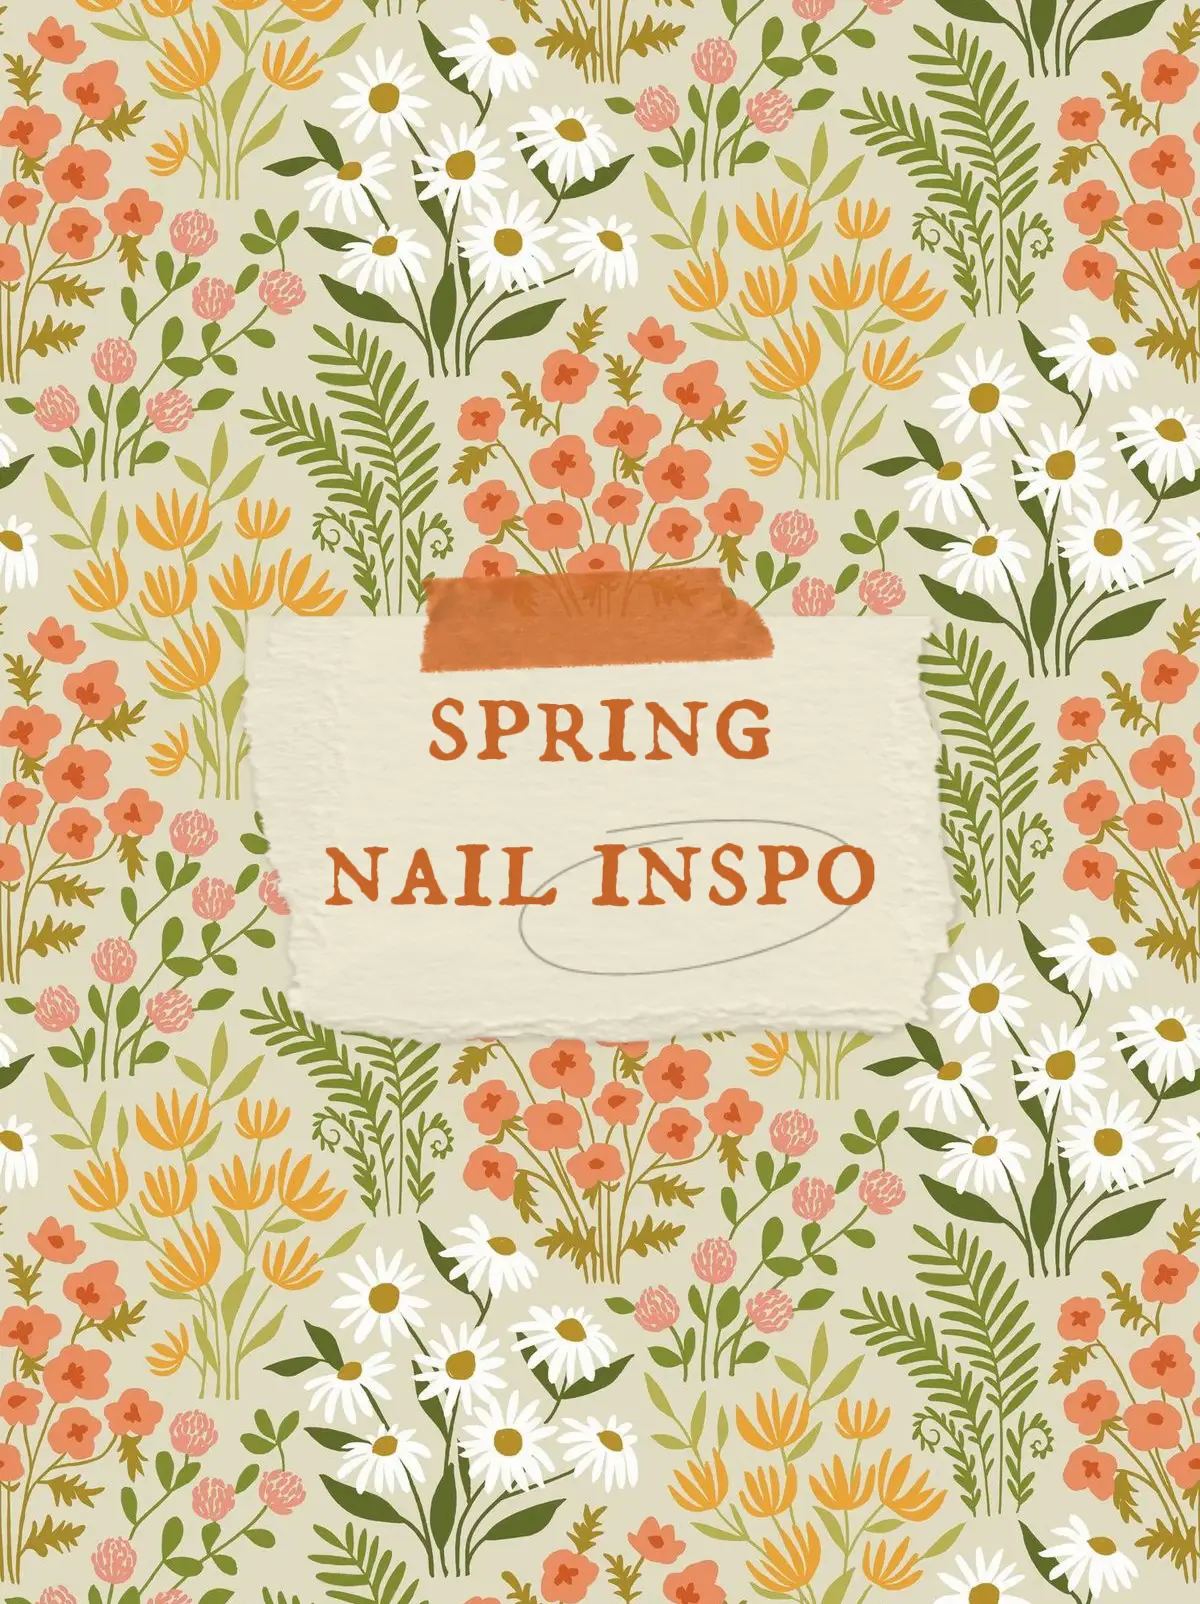  A flowery pattern with a sign that says "spring nail polish".